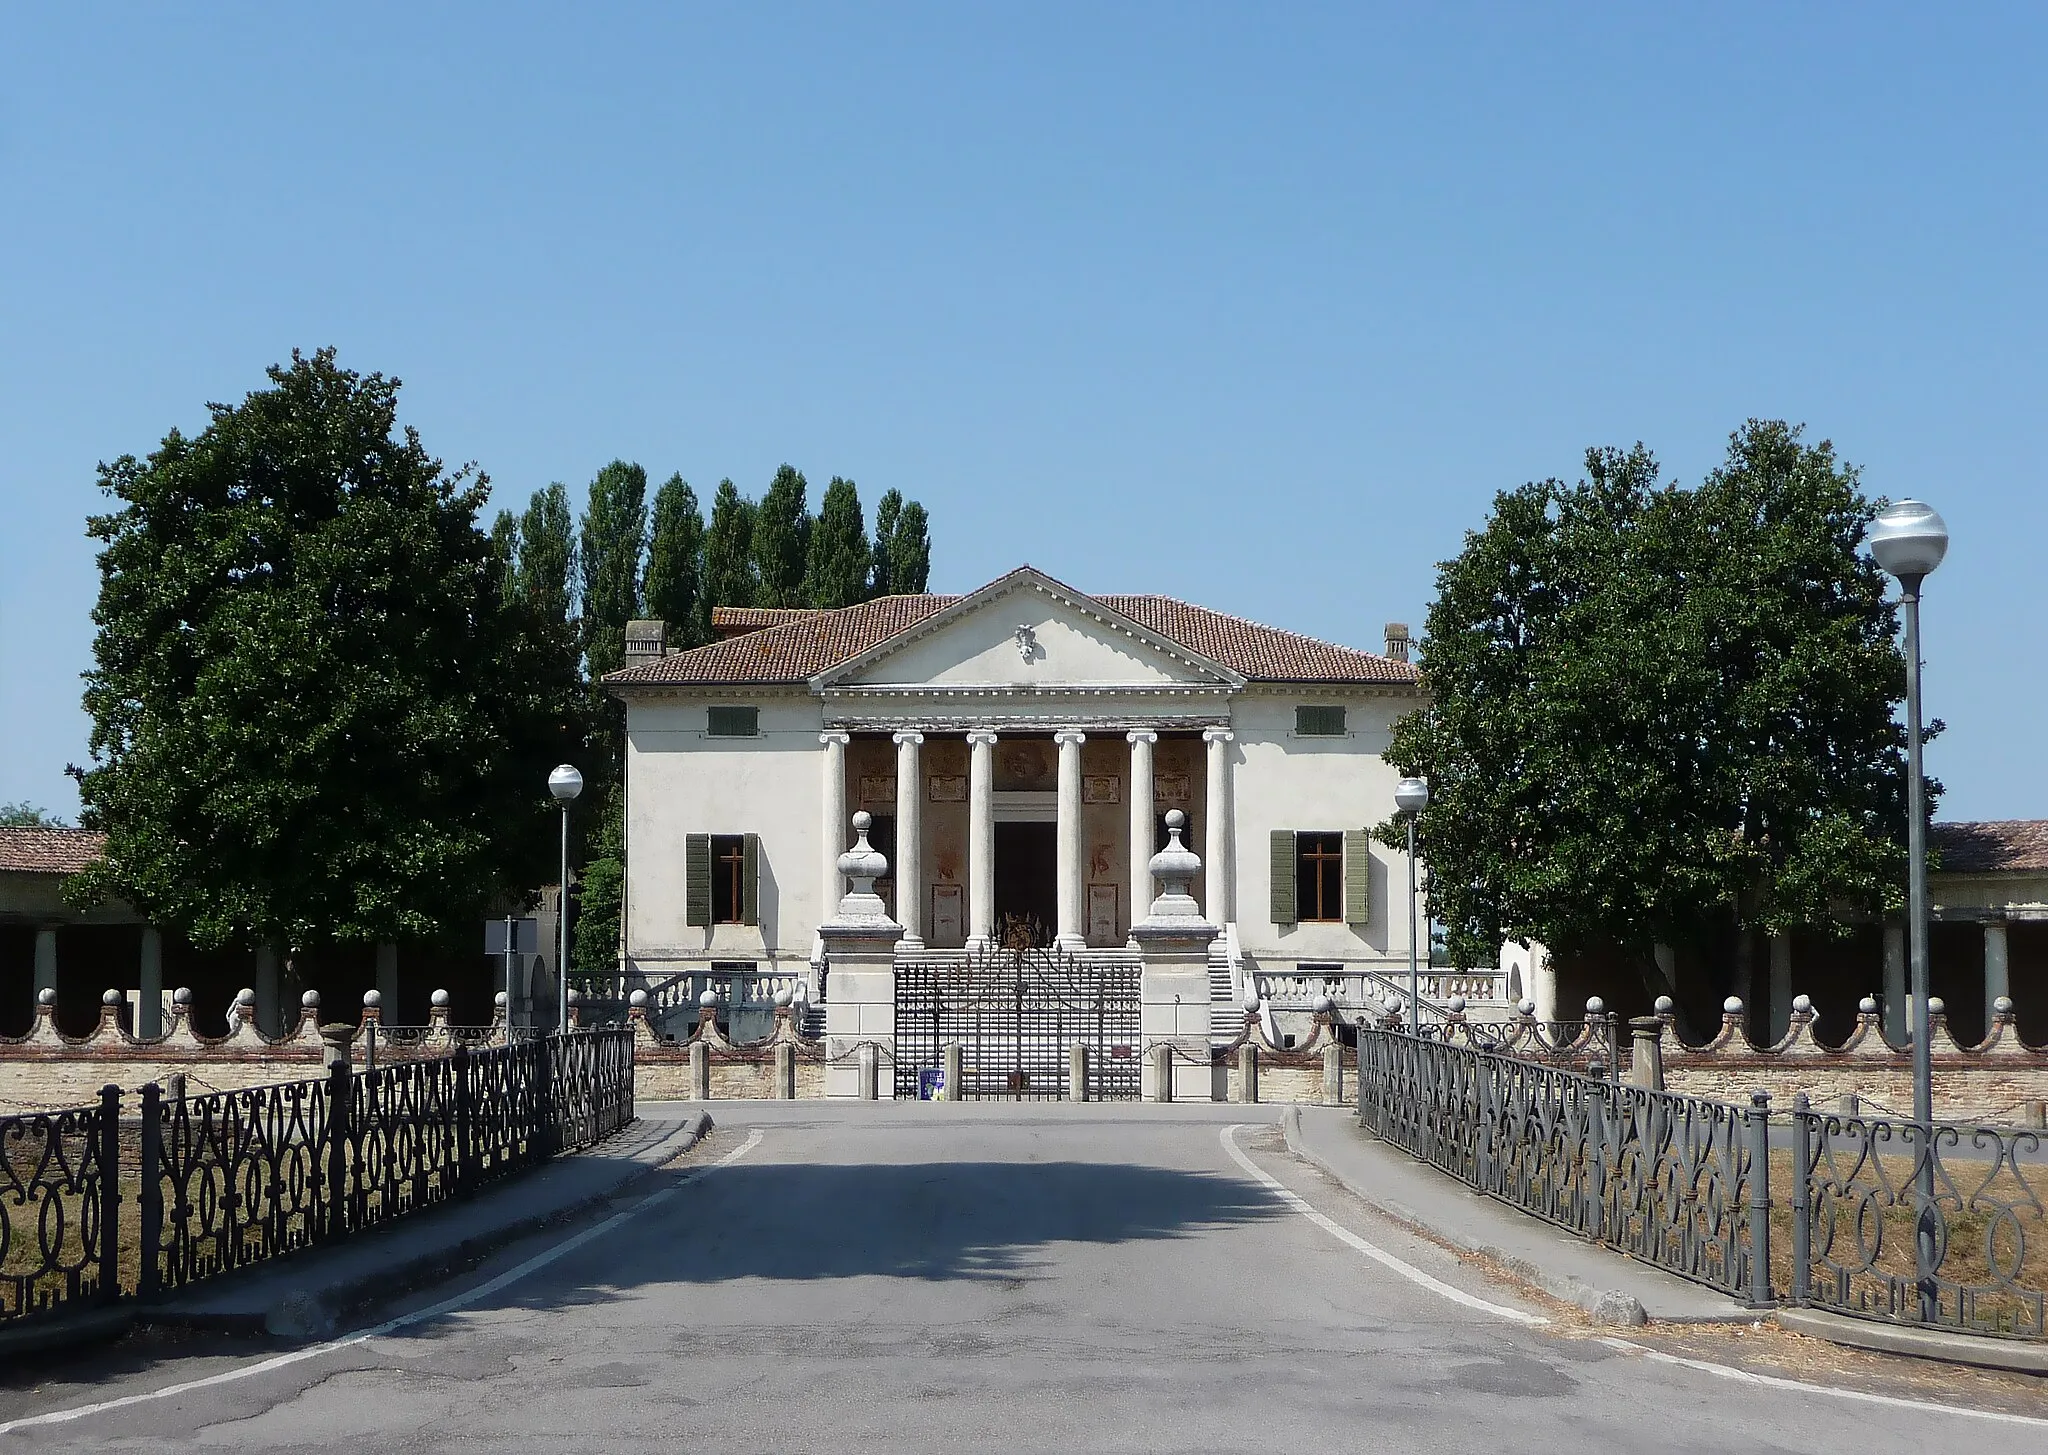 Photo showing: Villa Badoer in Fratta Polesine, province of Rovigo, Italy, designed by Andrea Palladio in 1554 and built 1556-1563.